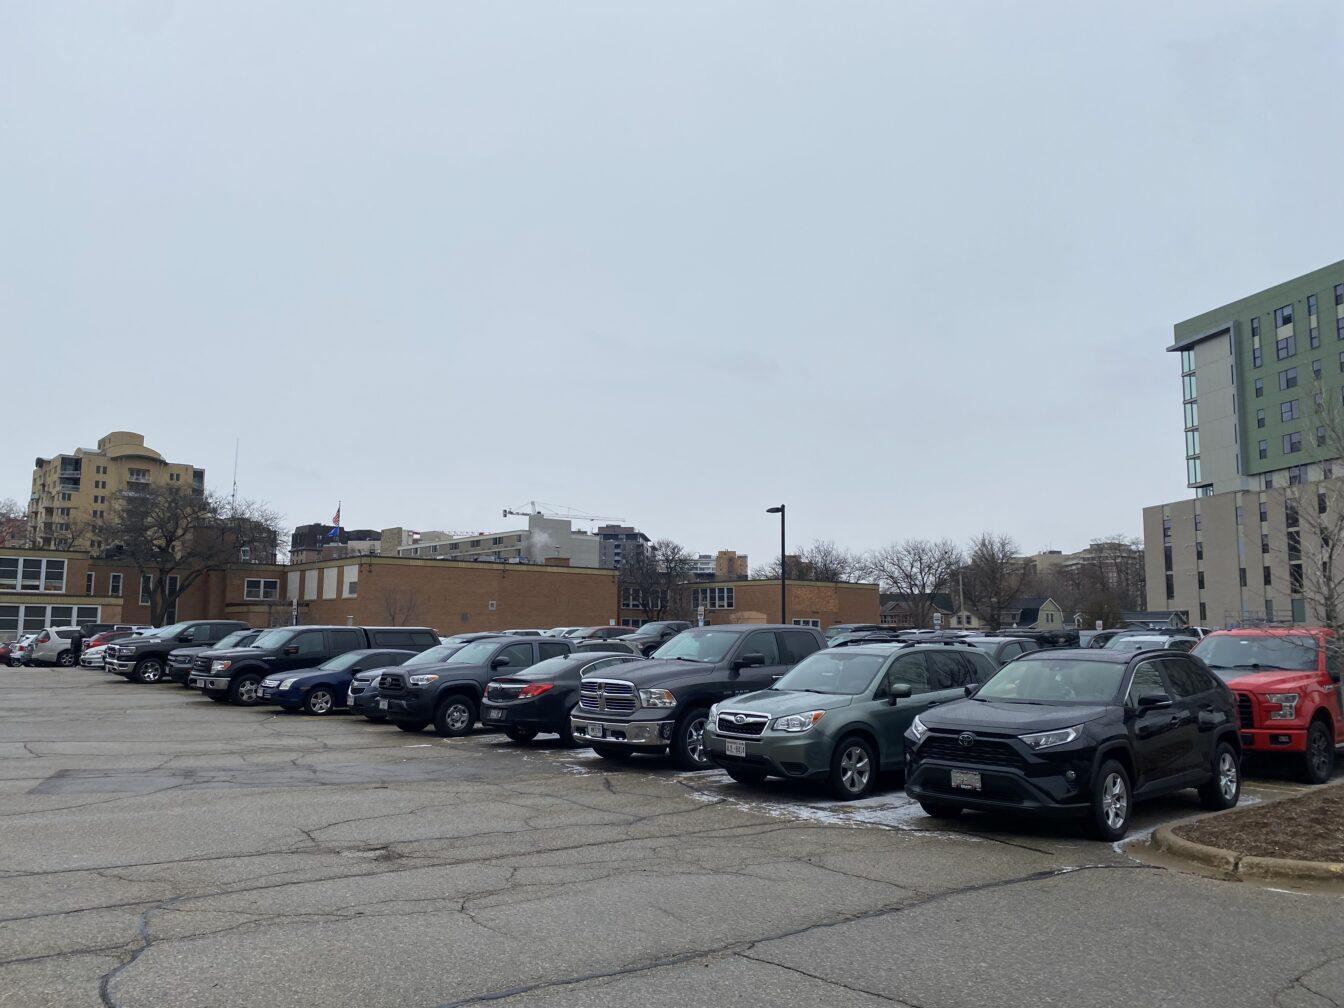 Madison City Council parking programs will increase access to public transportation